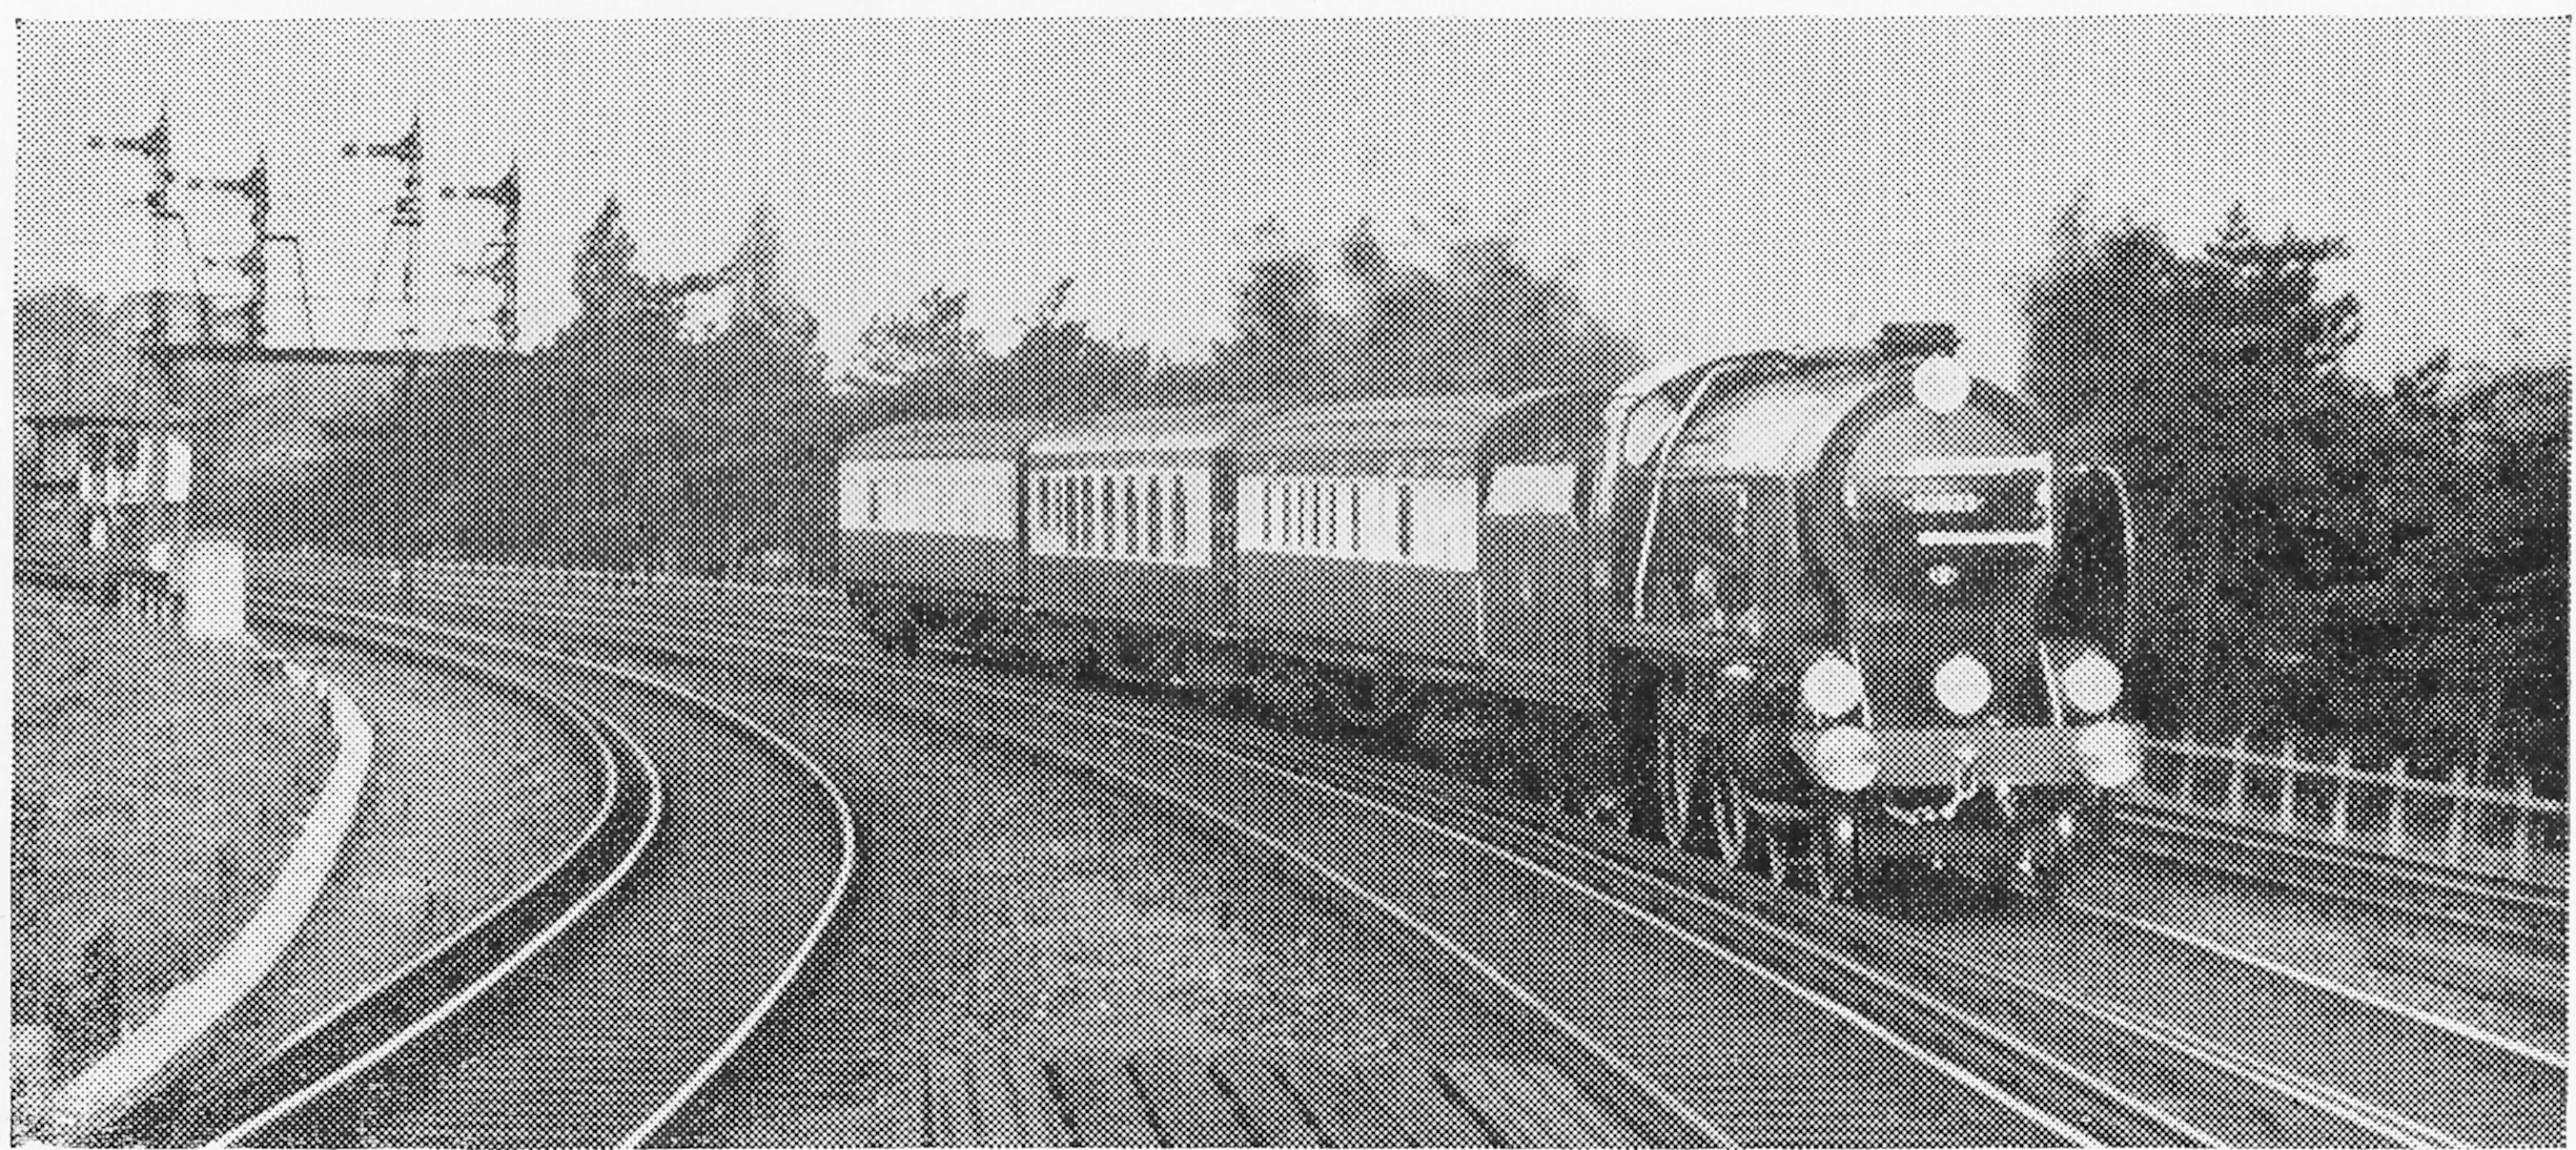 30925 passing Shortlands with a Special Train conveying HM The Queen from Victoria for a visit to the Medway towns. 24th October 1956. J. Head, courtesy The Railway Magazine Scanned from January 1957 RO.